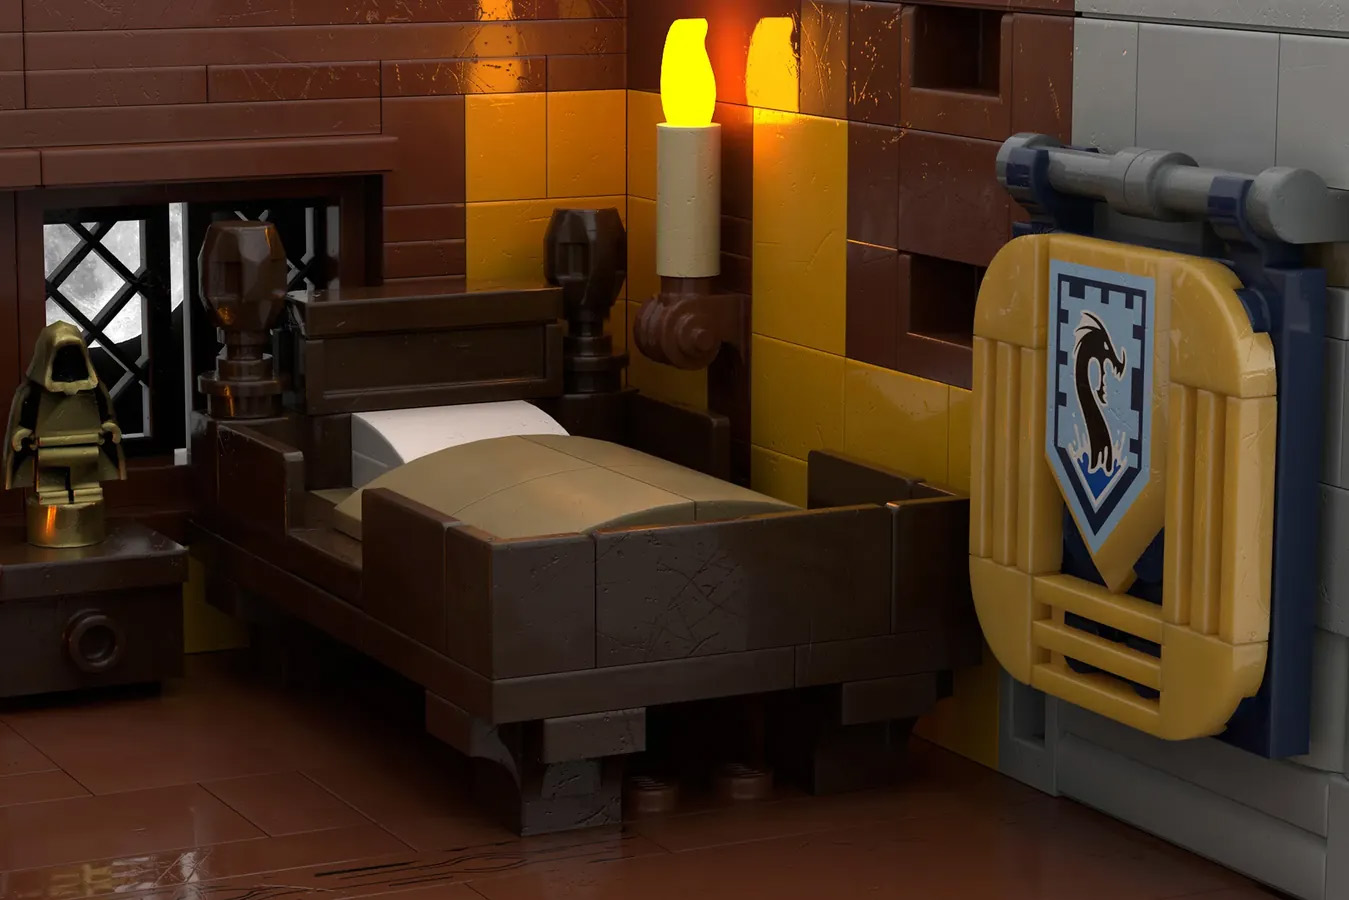 JOHN'S MEDIEVAL WATERMILL Achieves 10K Support on LEGO IDEAS